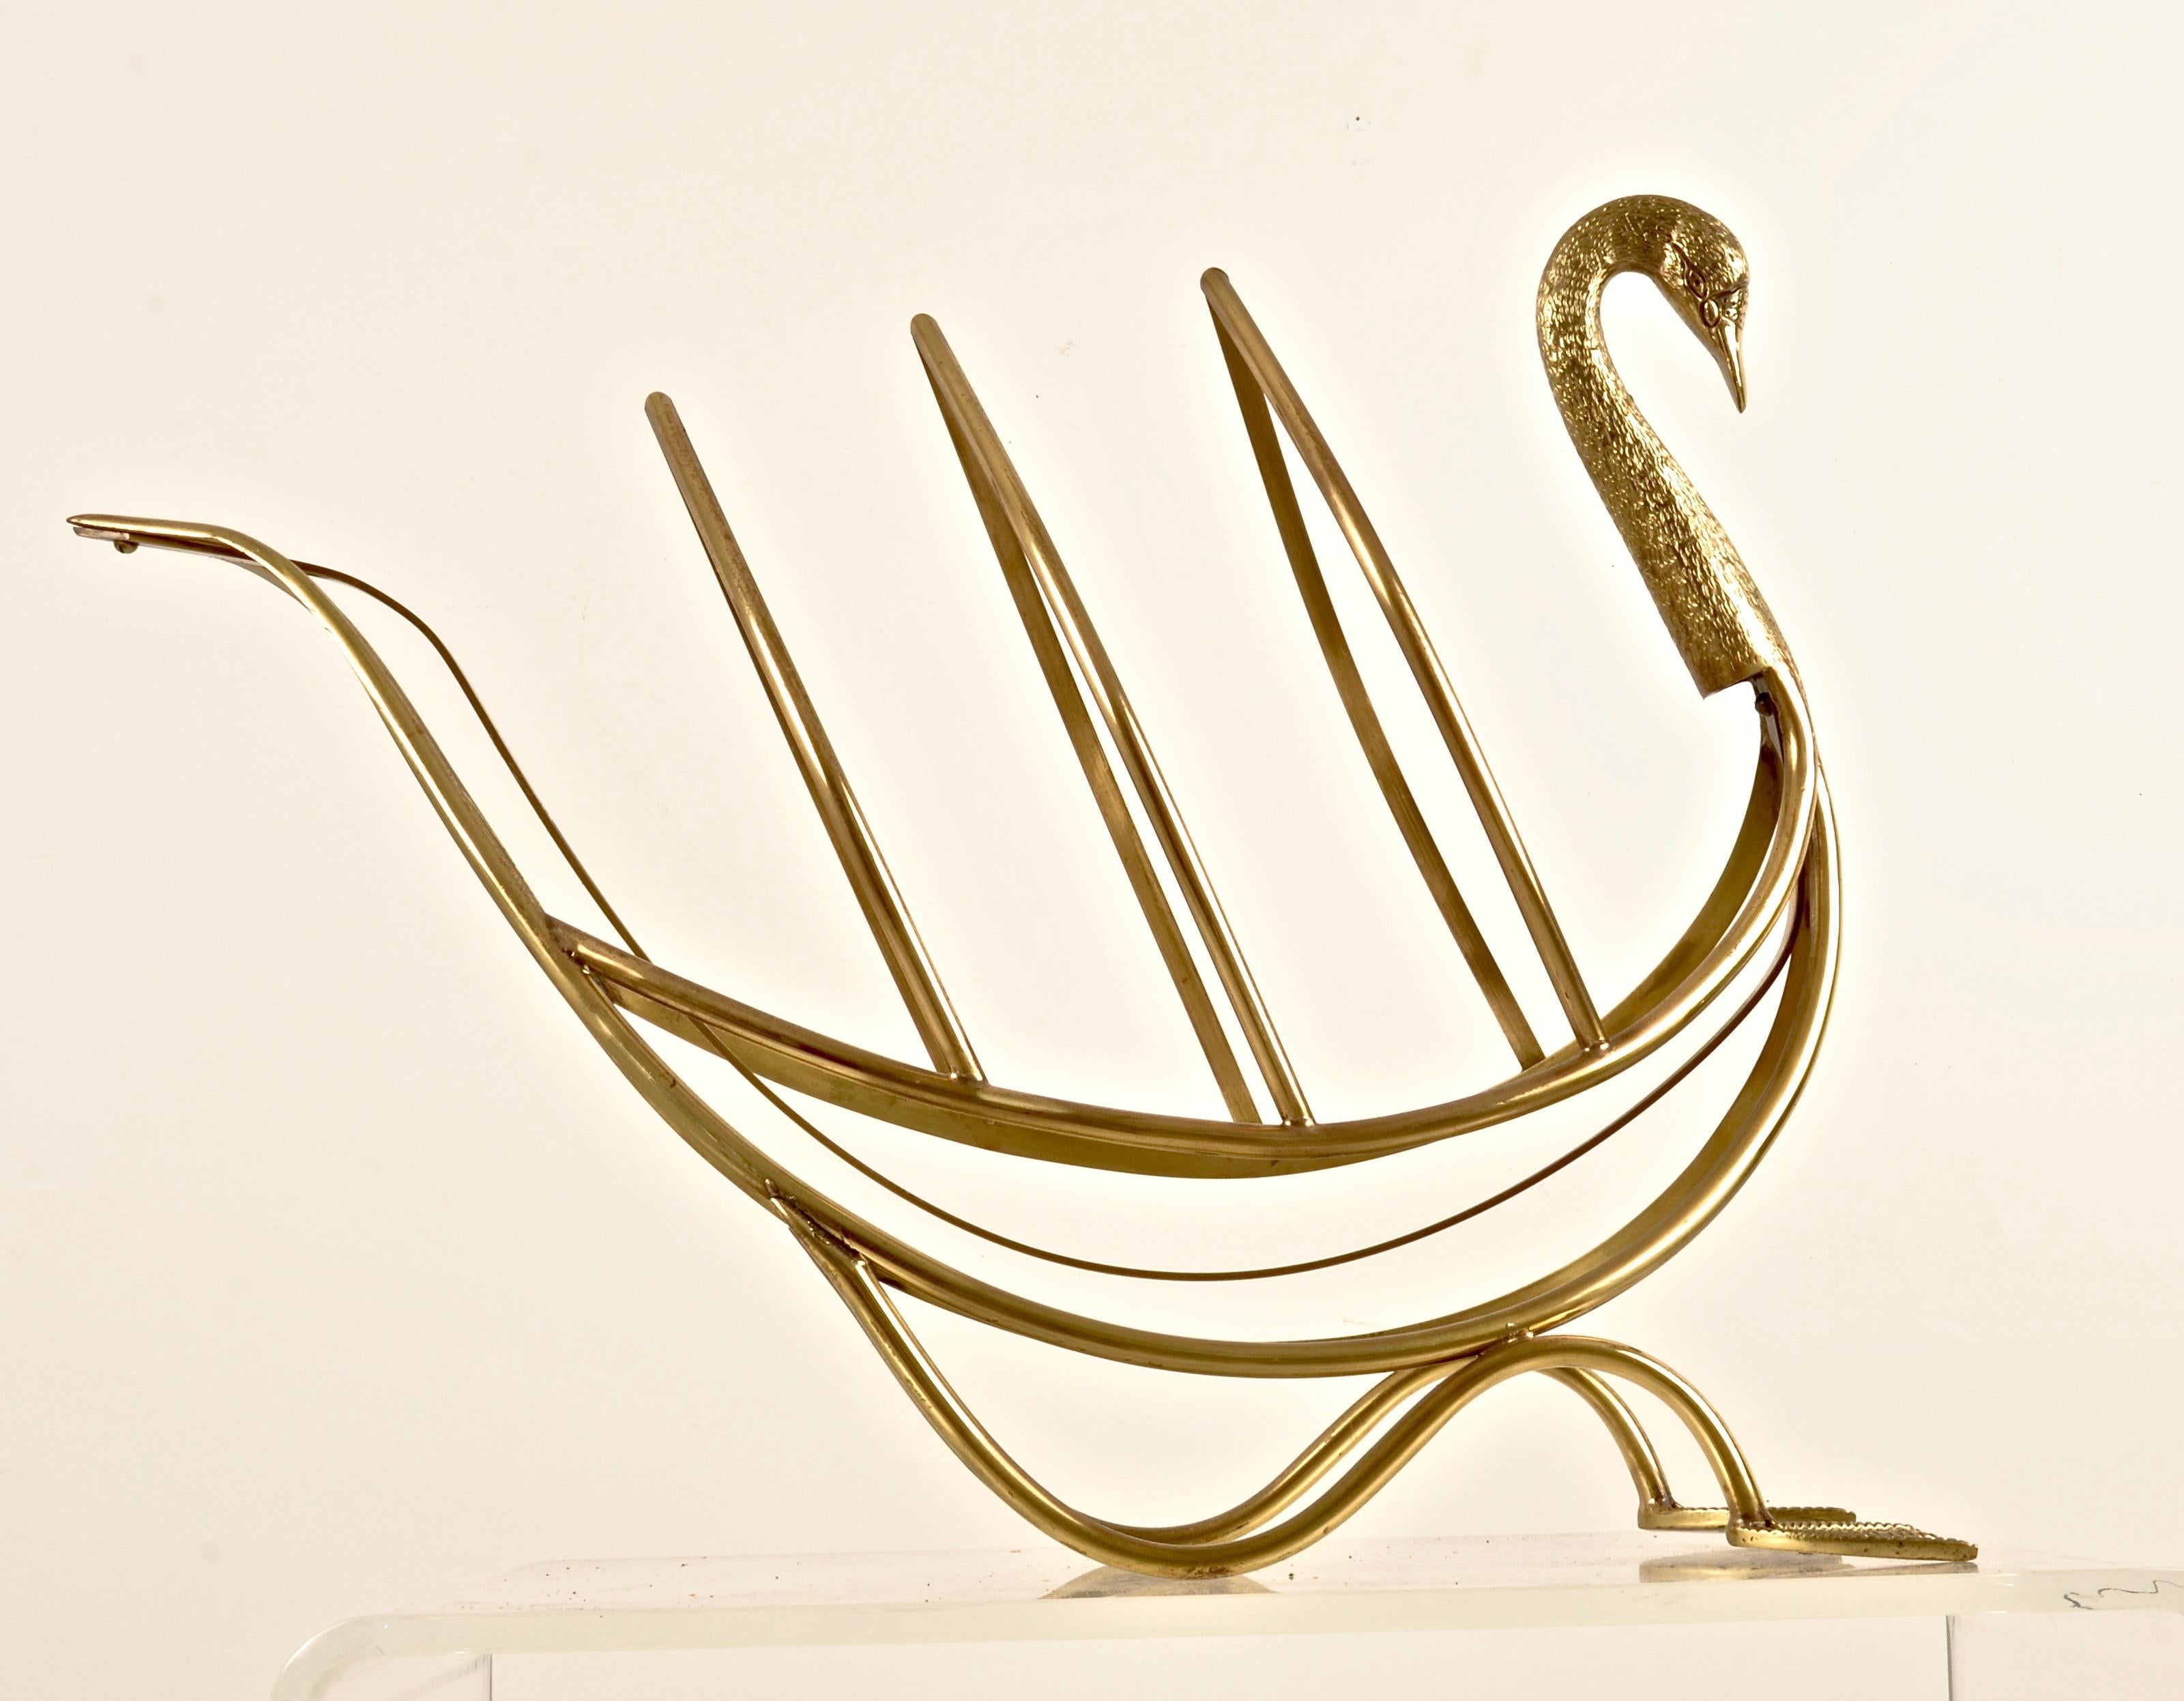 Charming swan form magazine stand in solid brass, designed by Maison Jansen. Marked 